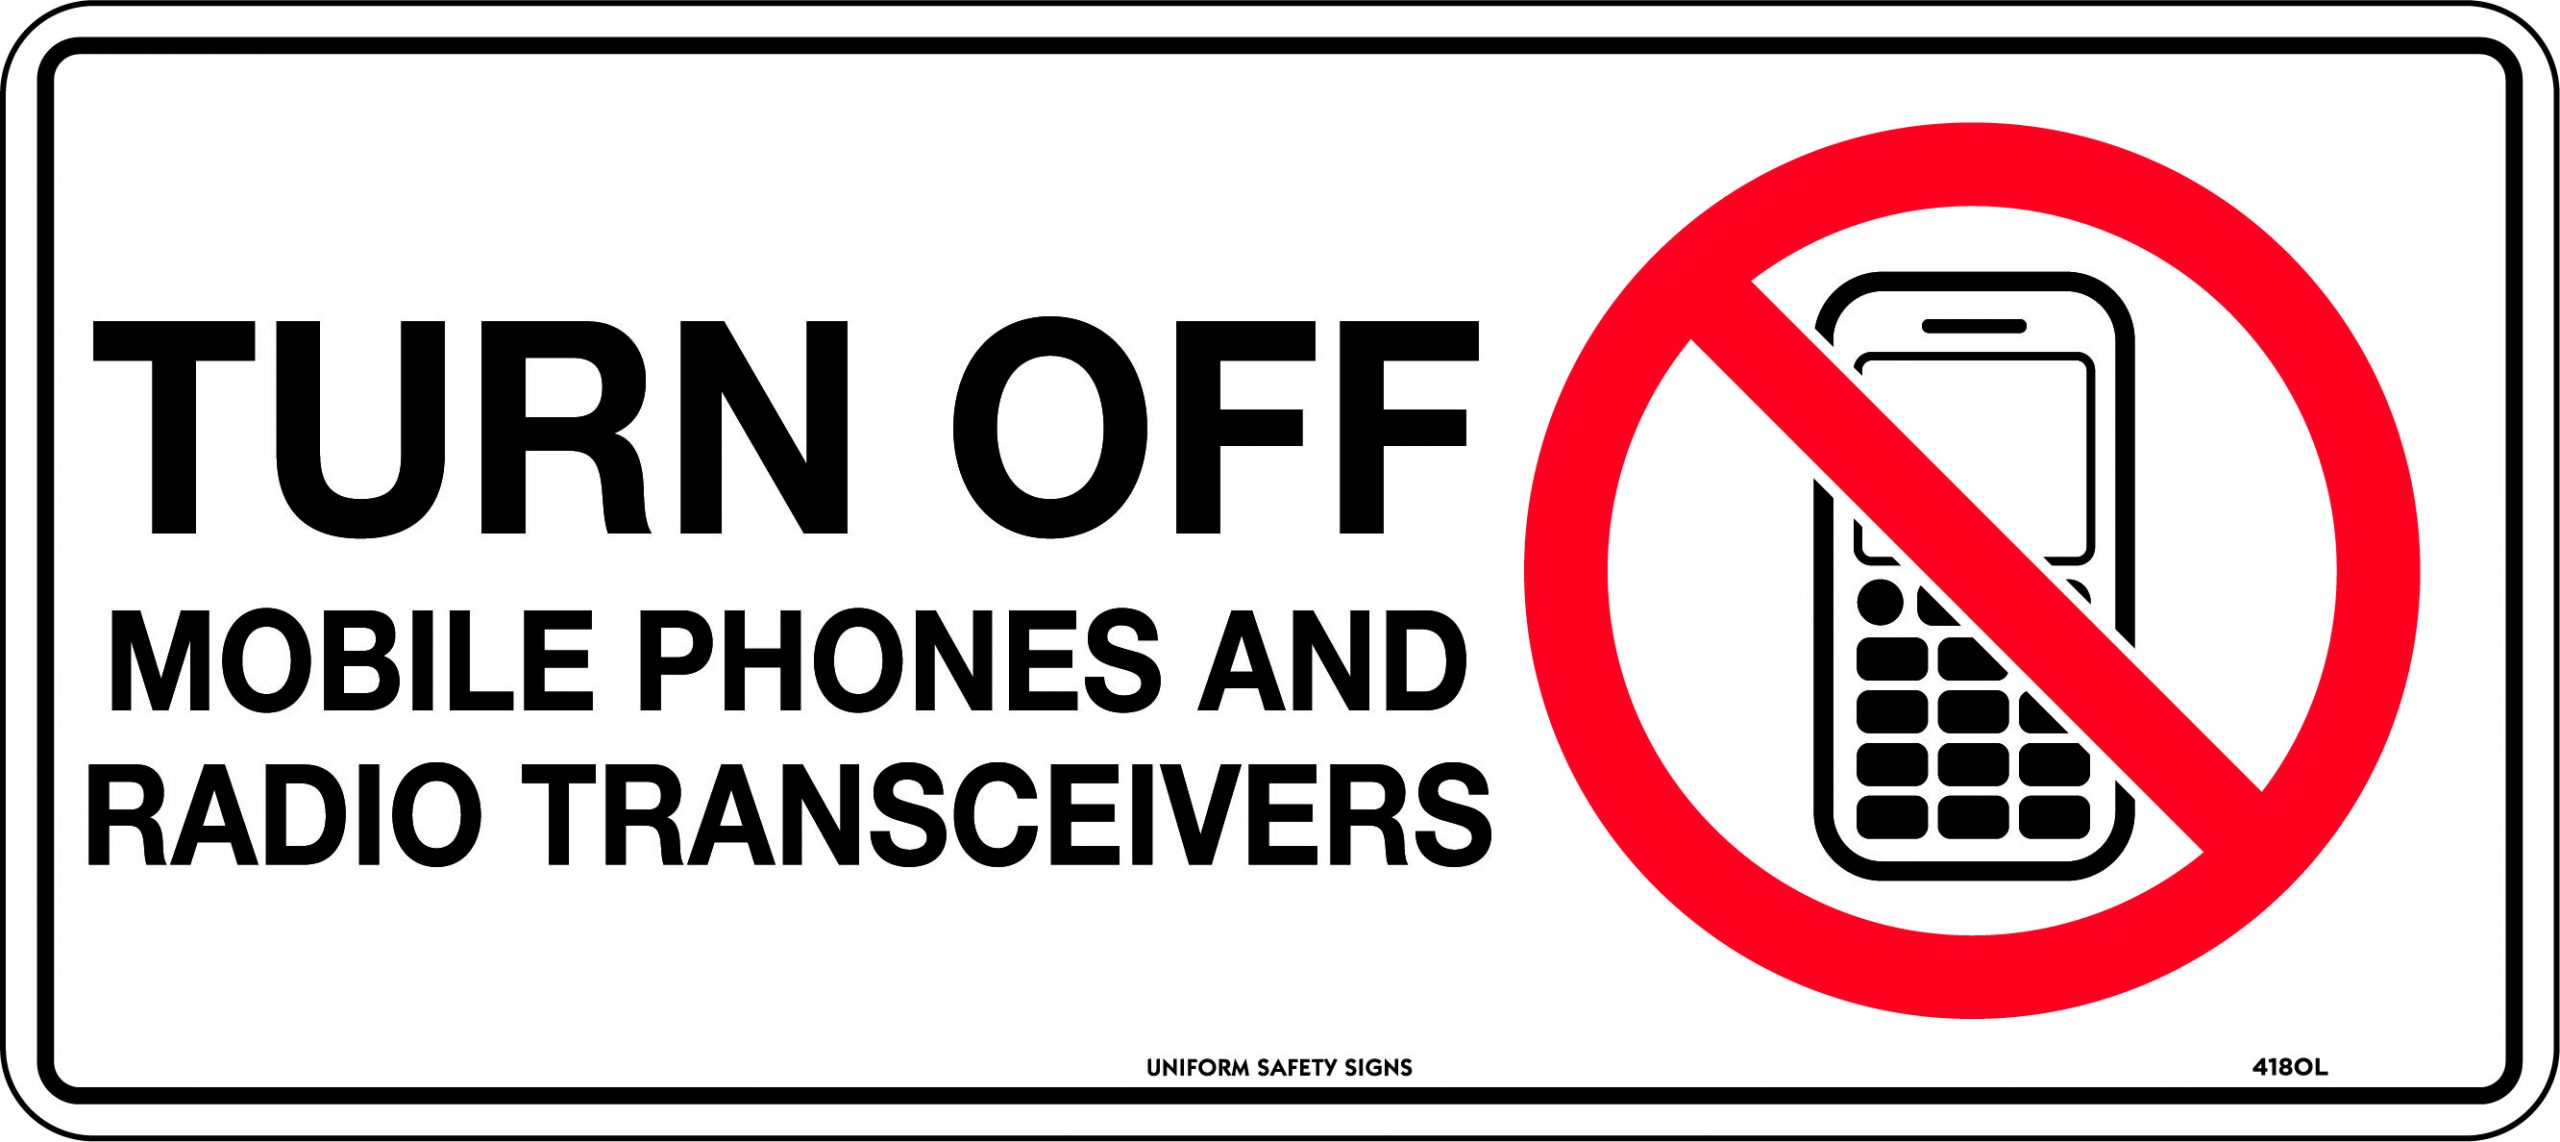 SIGN 450 X 200MM SA TURN OFF MOBILE PHONES AND RADIO TRANSCEIVERS